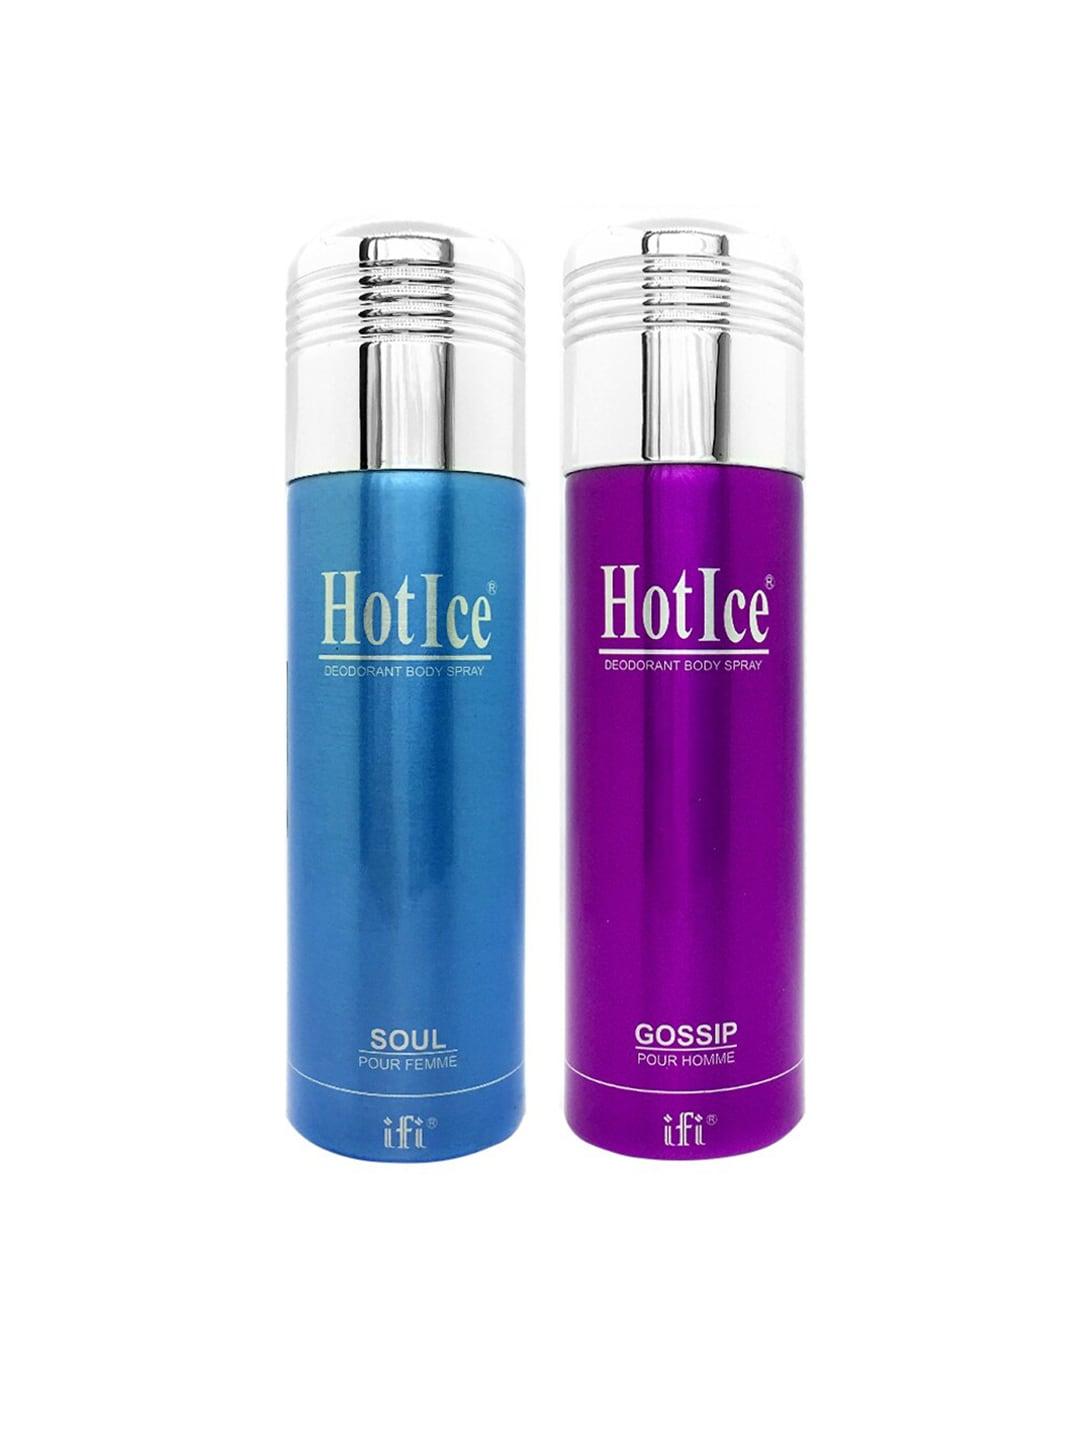 Hot Ice Soul Fomme & Gossip Homme Deodorant, 200ml Each - ( Set of 2)